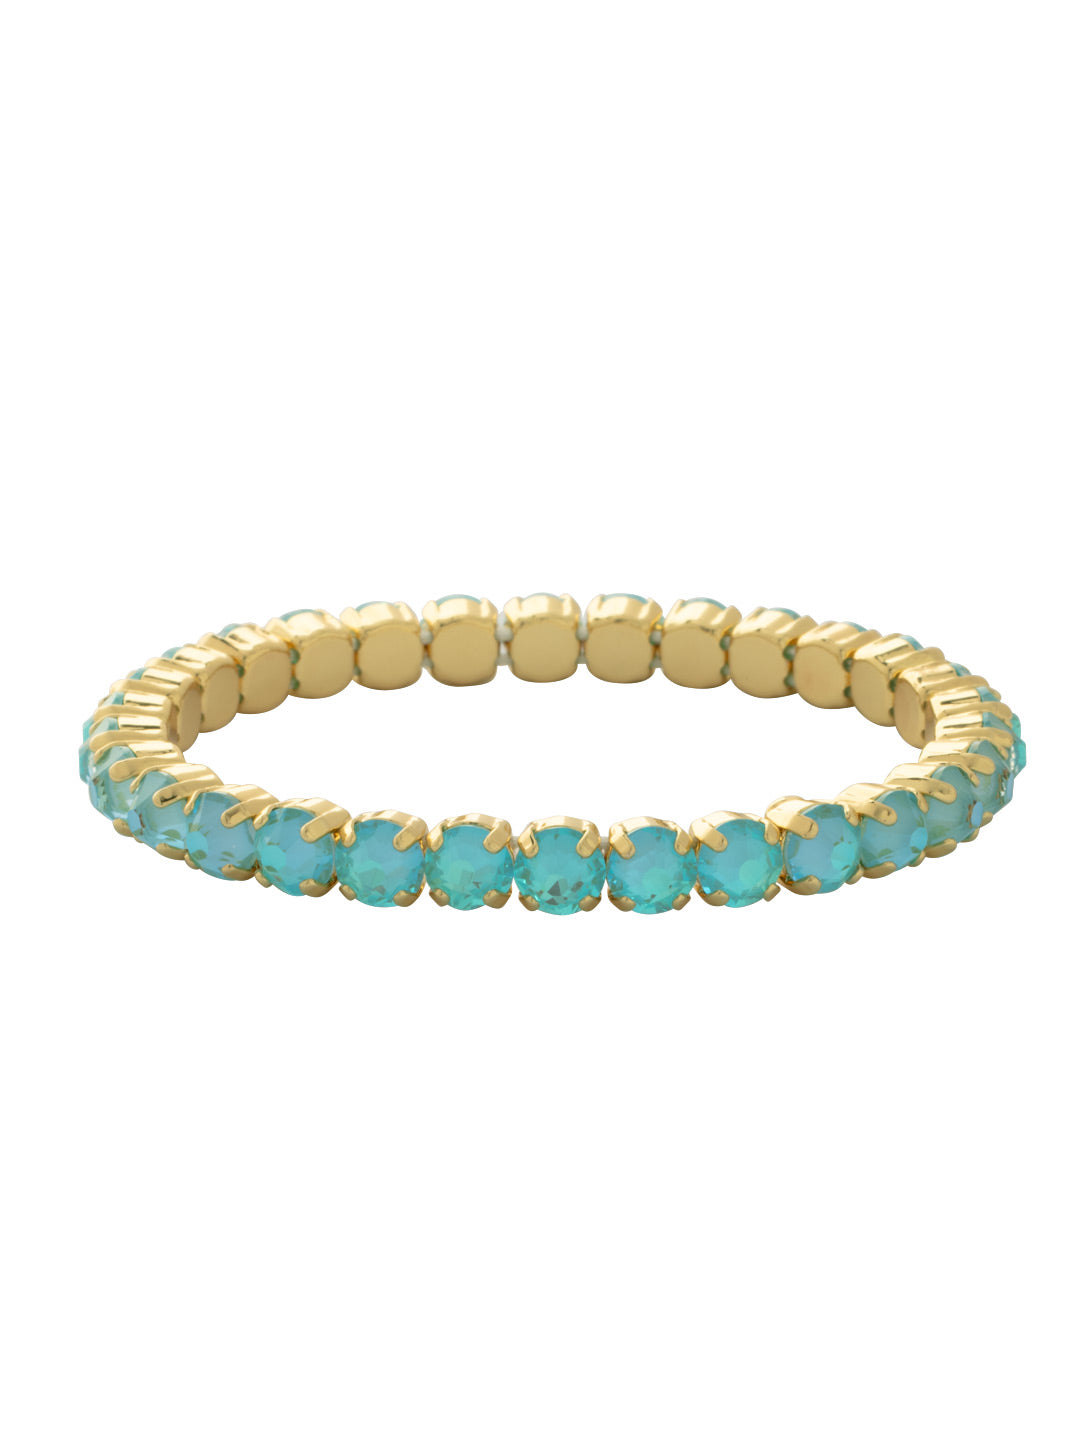 Mini Sienna Stretch Bracelet - BFD52BGPRT - <p>The Mini Sienna Stretch Bracelet is a mini take on a bestselling style! The Mini Sienna Stretch Bracelet features a line of small round crystals on a sturdy jewelers' filament, stretching to fit most wrists comfortably, without the hassle of a clasp! From Sorrelli's Portofino collection in our Bright Gold-tone finish.</p>